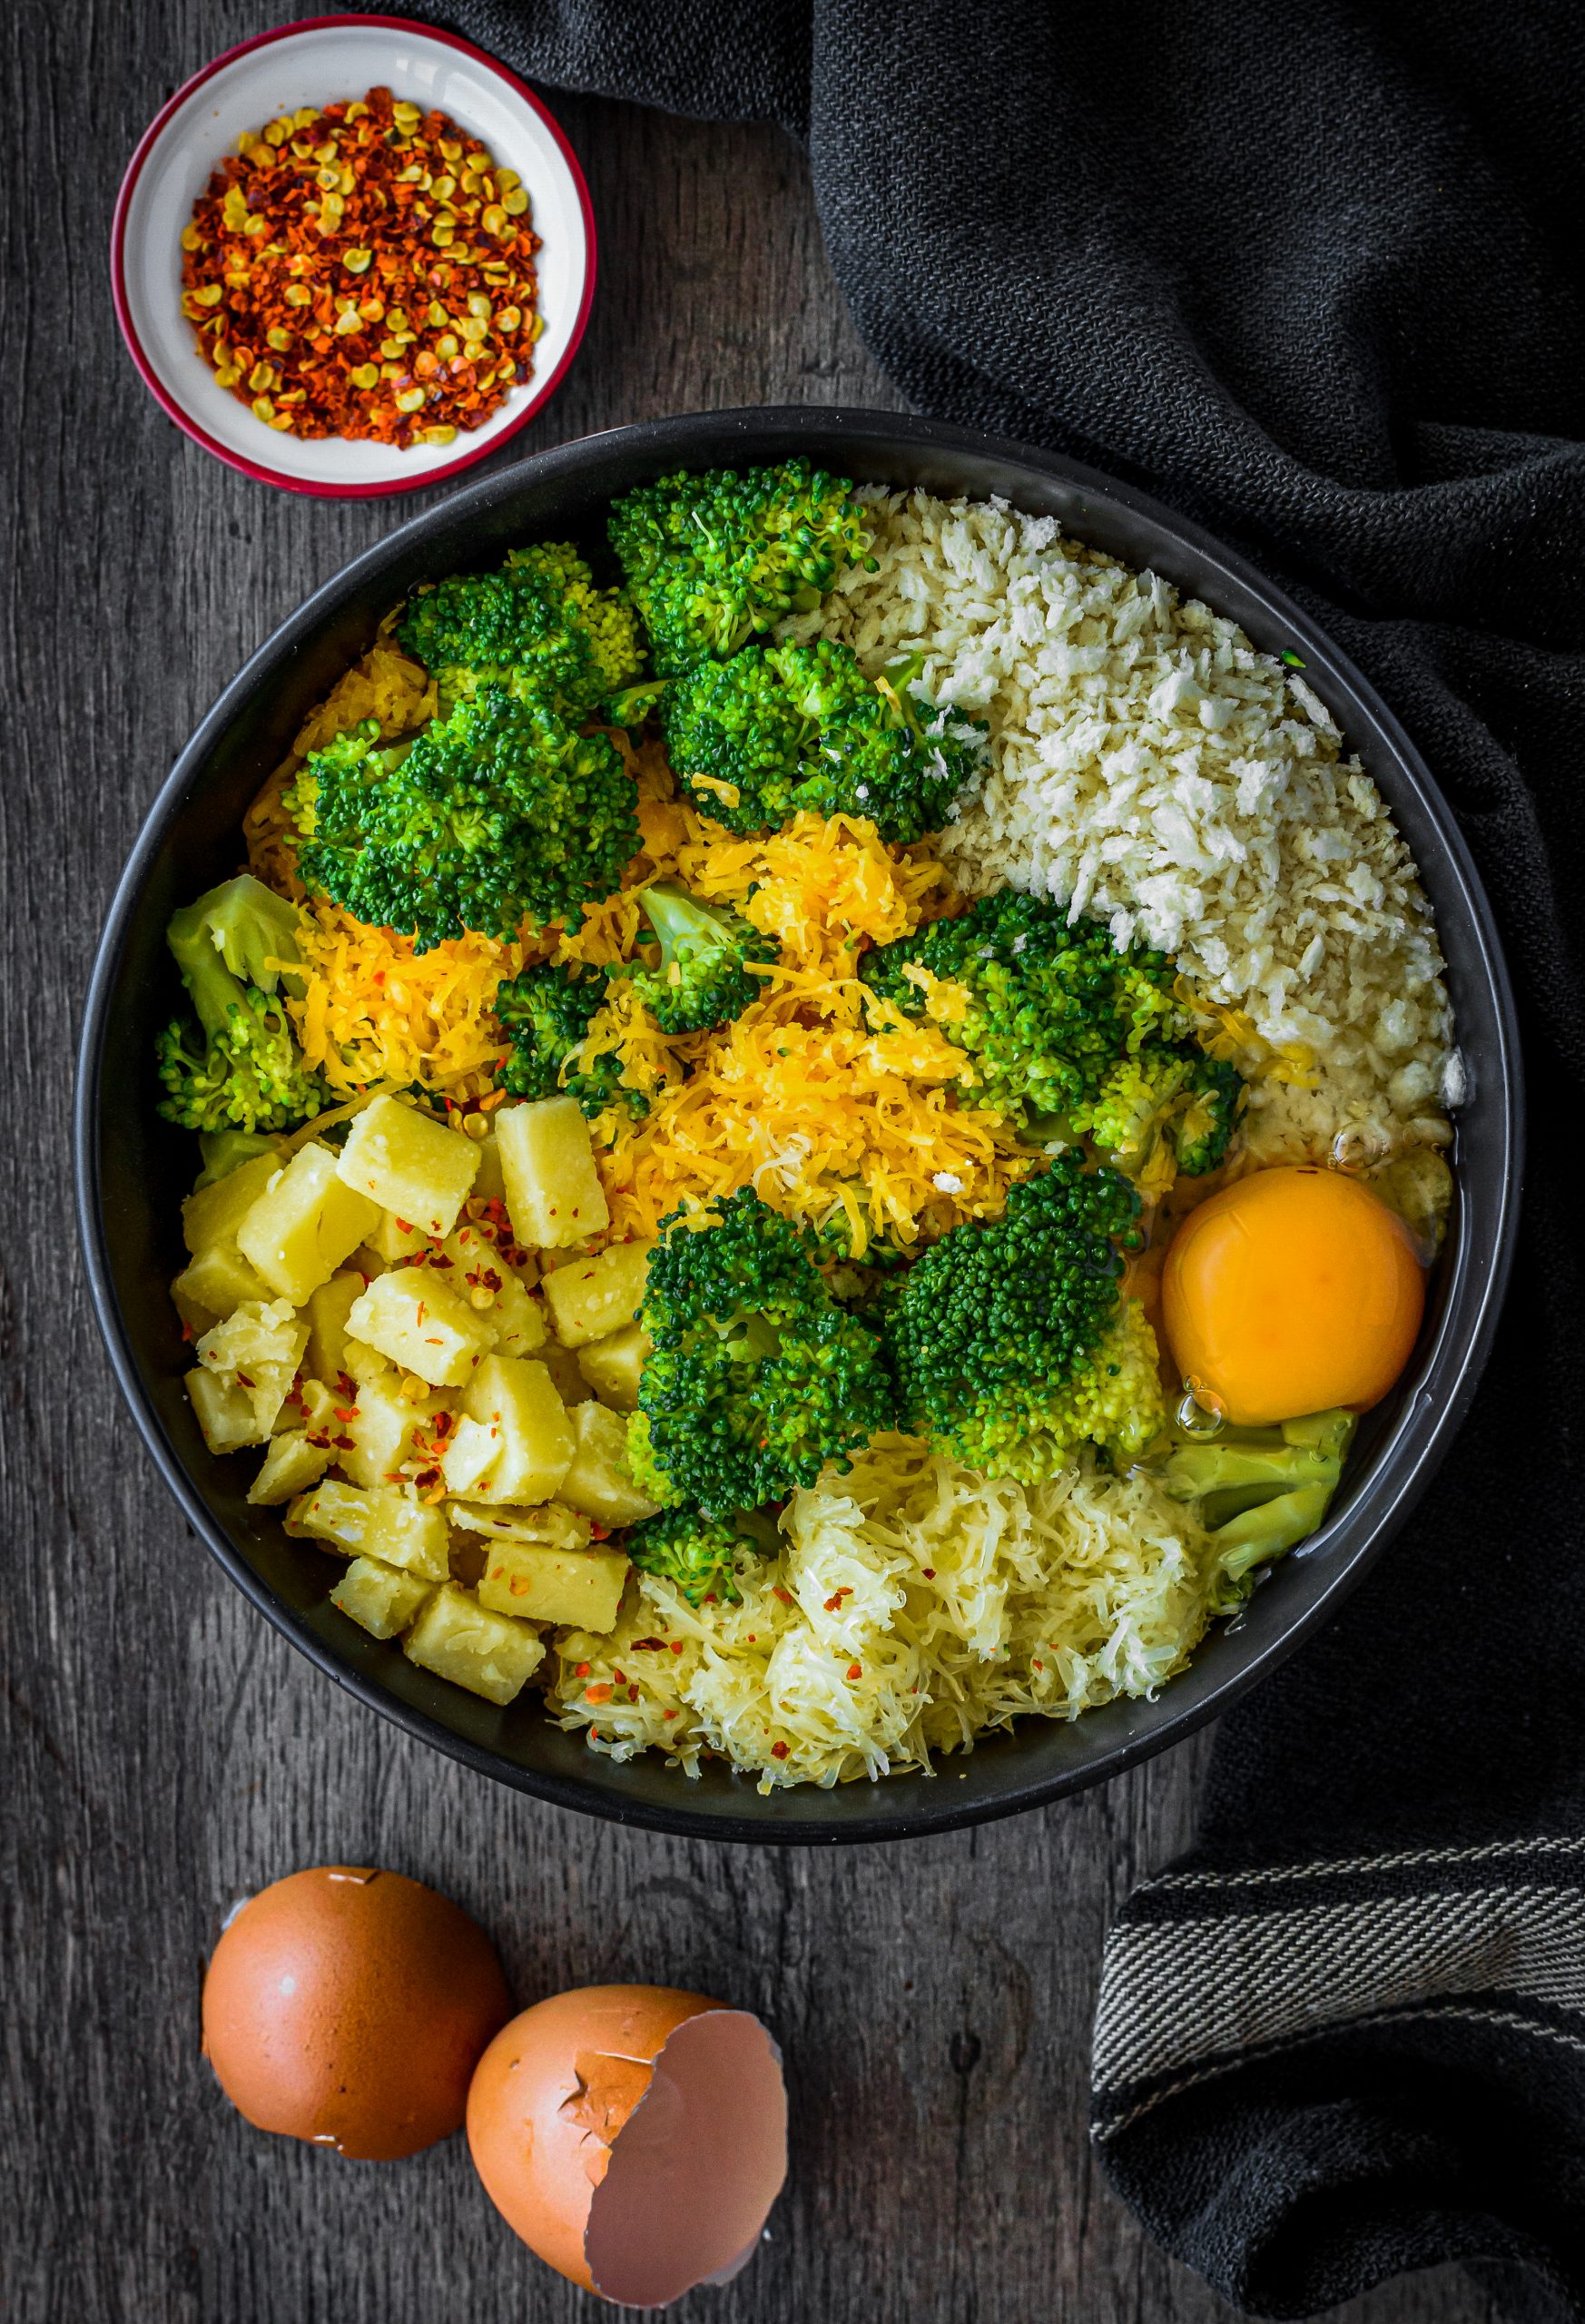  In a large mixing bowl, stir together the broccoli, velveeta, colby cheese, cheddar cheese, ¼ cup panko crumbs, red pepper flakes, 1 egg, and salt and pepper to taste. 